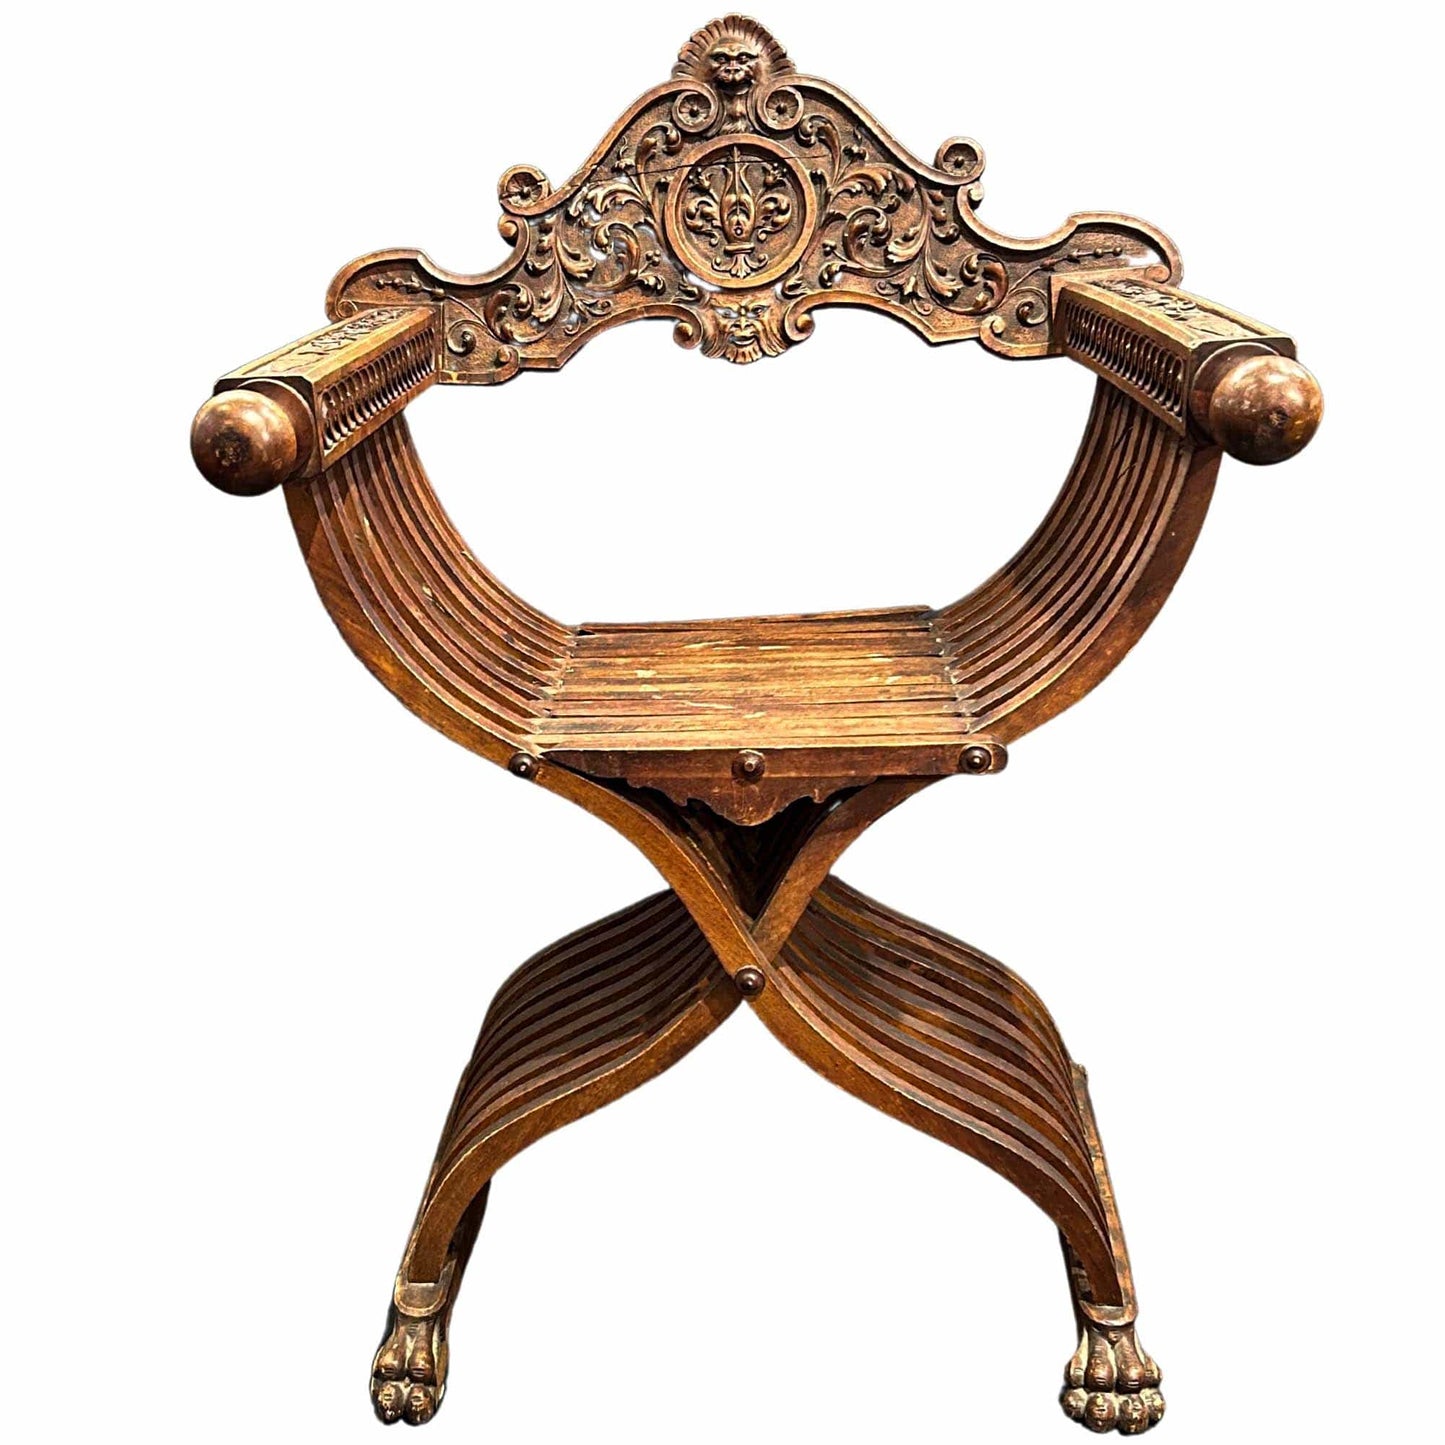 Carved Savonarola Chair Zoom Out View